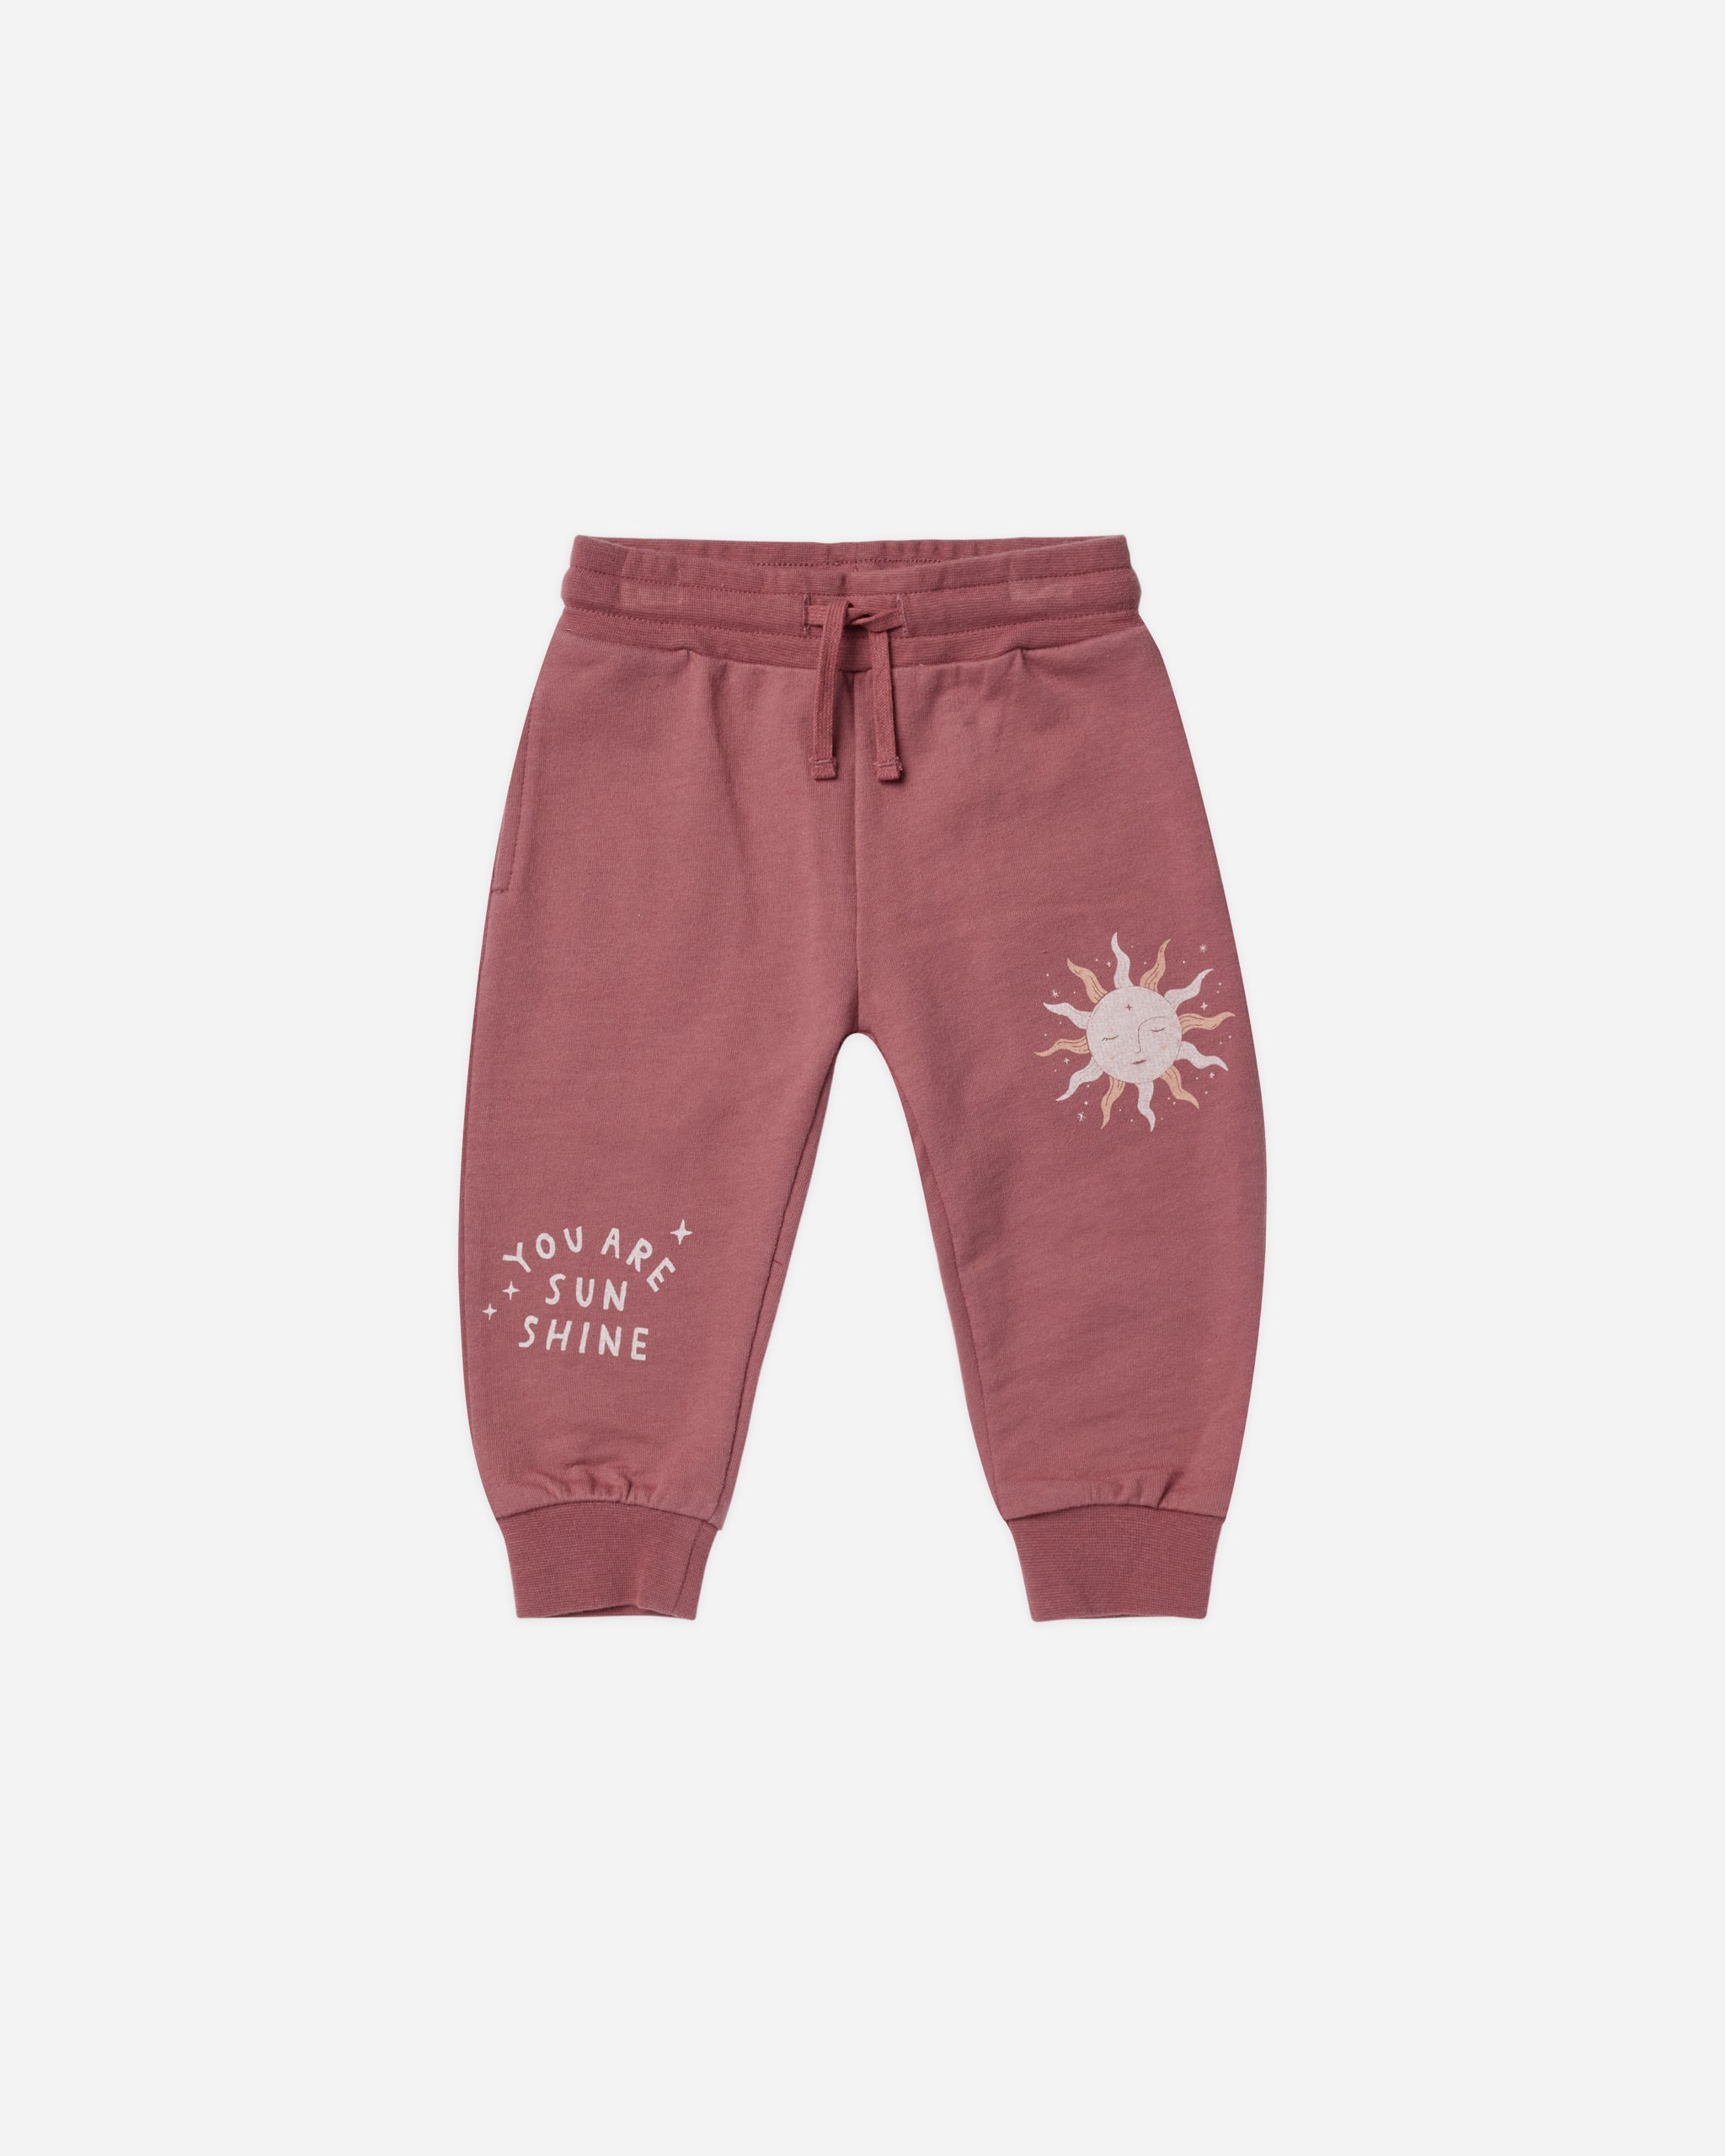 Jogger Pant || Sun - Rylee + Cru | Kids Clothes | Trendy Baby Clothes | Modern Infant Outfits |